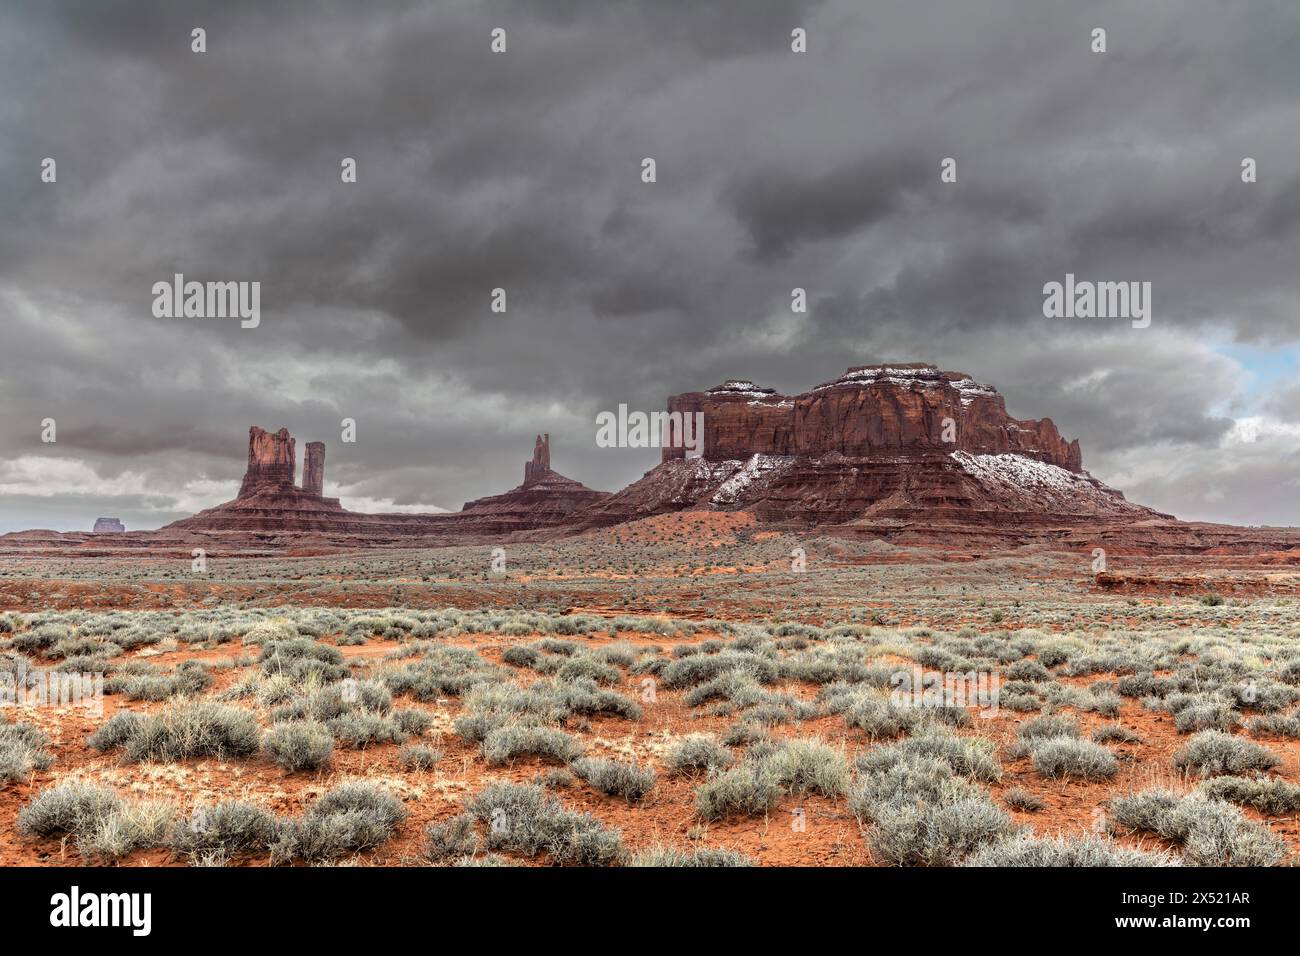 Scenic view of mountainous formations in Monument Valley during a cold, snowy morning while driving in the Navajo park in Arizona. Stock Photo